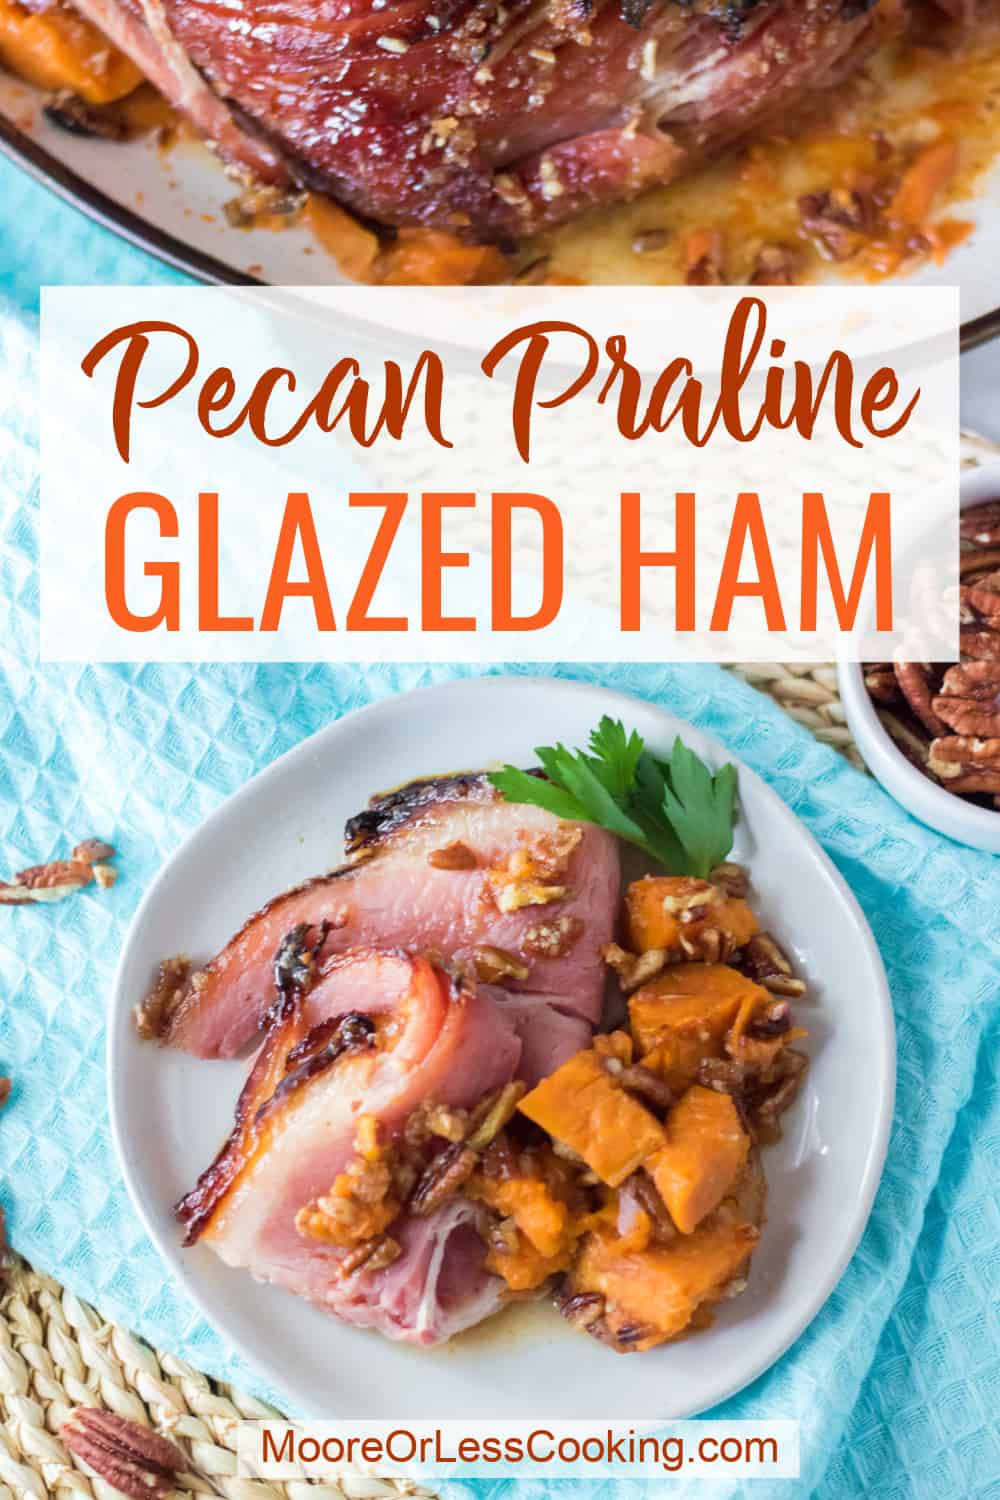 Let this scrumptious Pecan Praline Glazed Ham be the centerpiece of your holiday celebrations this year. A buttery maple syrup glaze helps infuse the ham while it bakes to perfection. Add another delicious coating of brown sugar and crushed pecans for a delectable sweet and nutty finishing touch. via @Mooreorlesscook